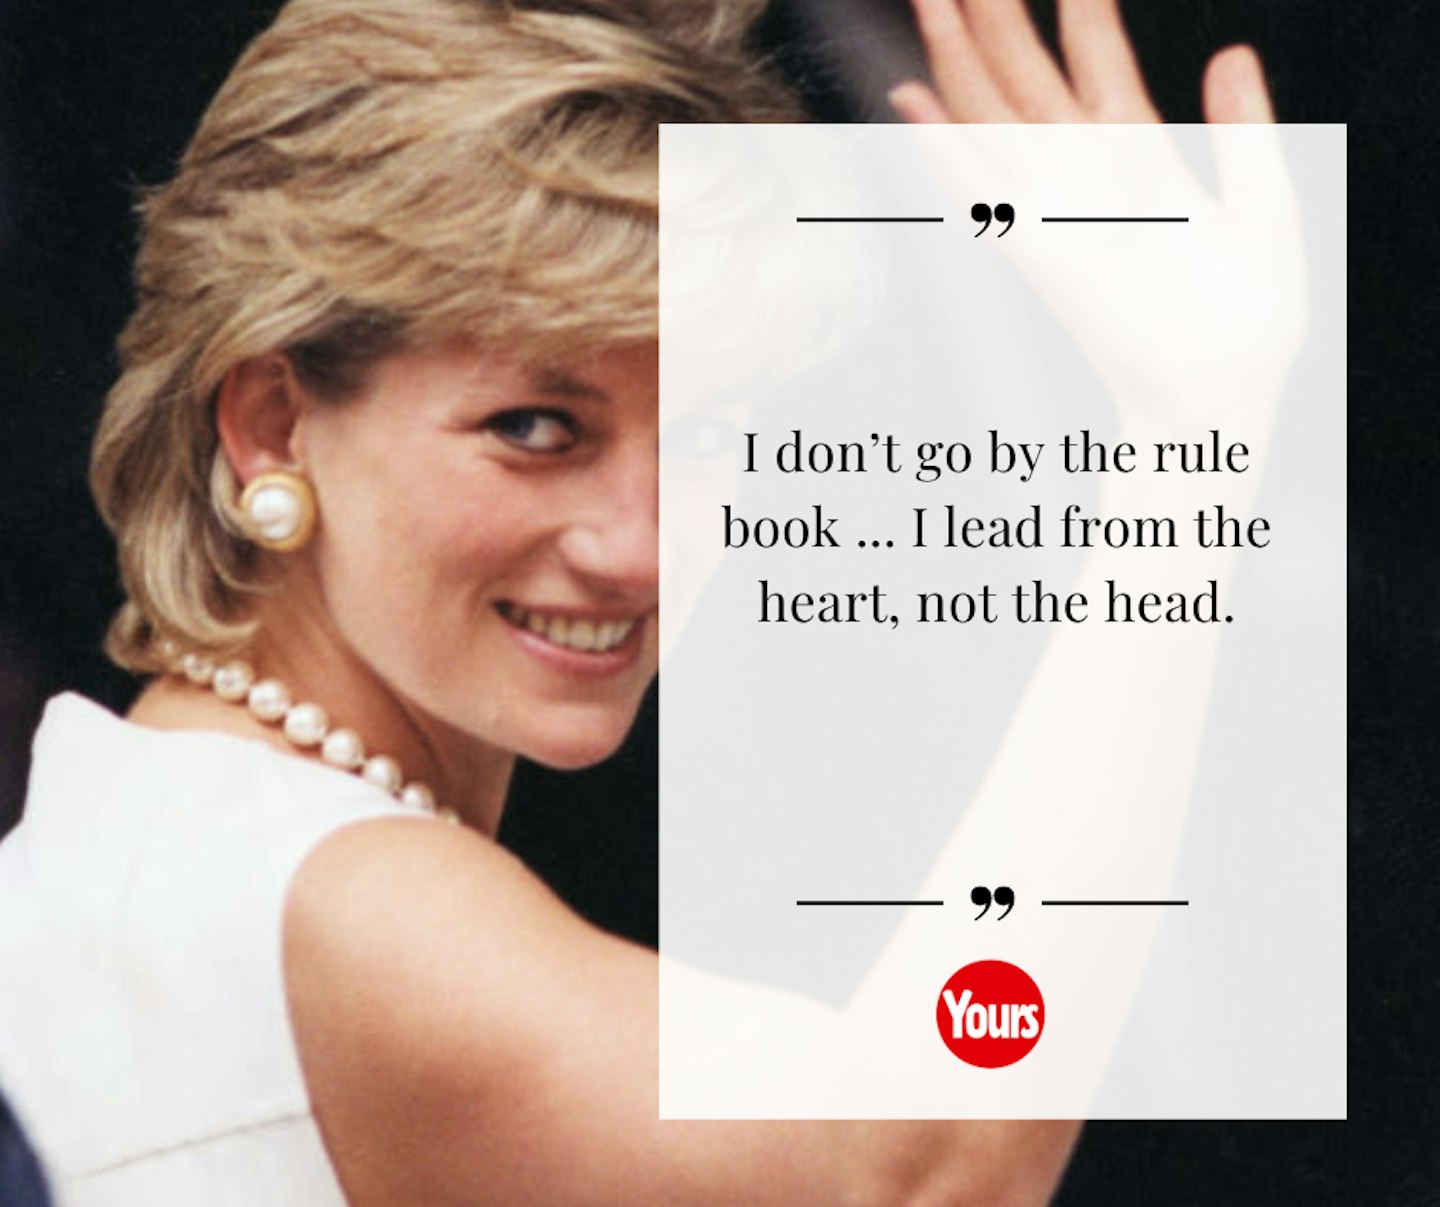 Princess Diana quote about not following the rule book